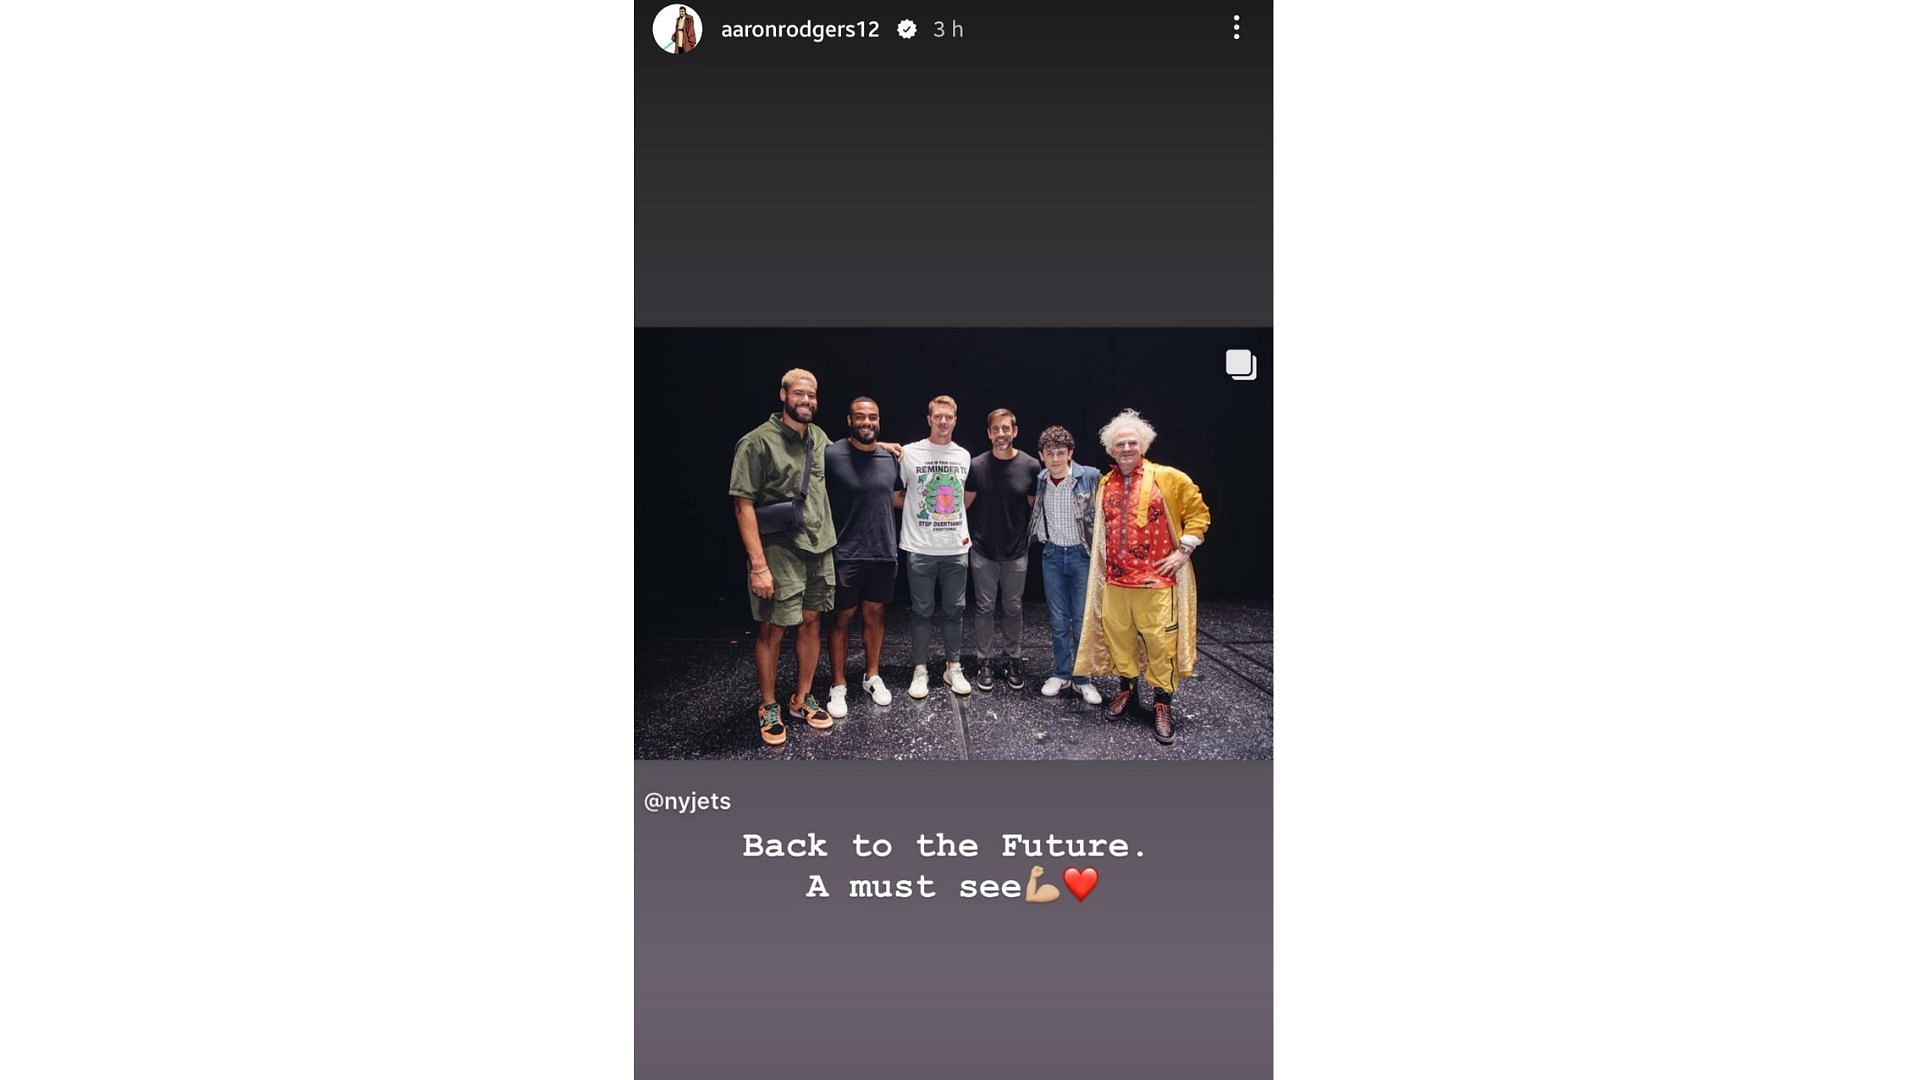 Aaron Rodgers gives a green signal to Back to the Future: The Musical (Image Credit: Aaron Rodgers&#039; Instagram Story).